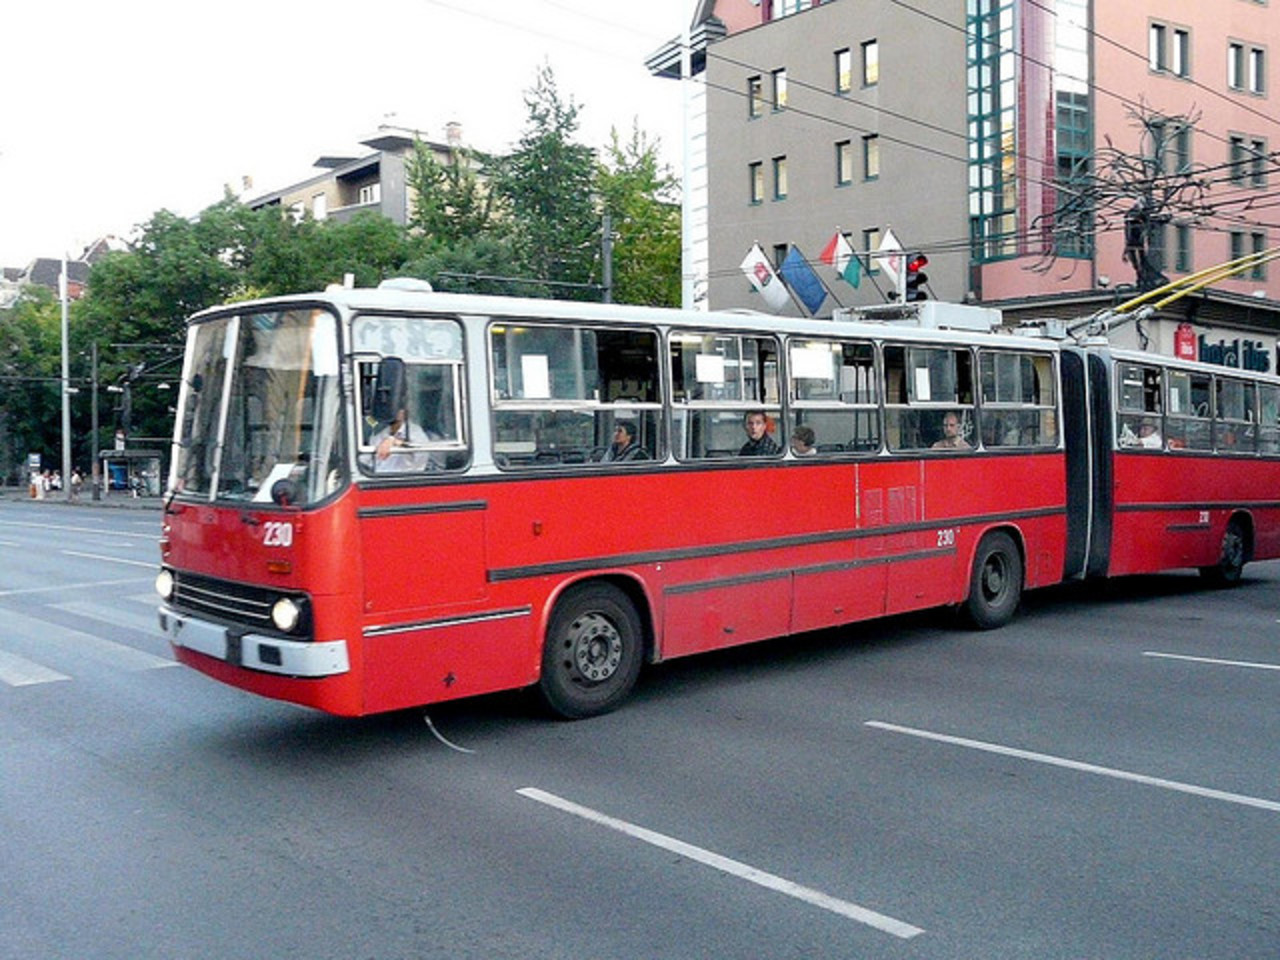 IKARUS 280 Trolley Bus - Budapest Hungary | Flickr - Photo Sharing!